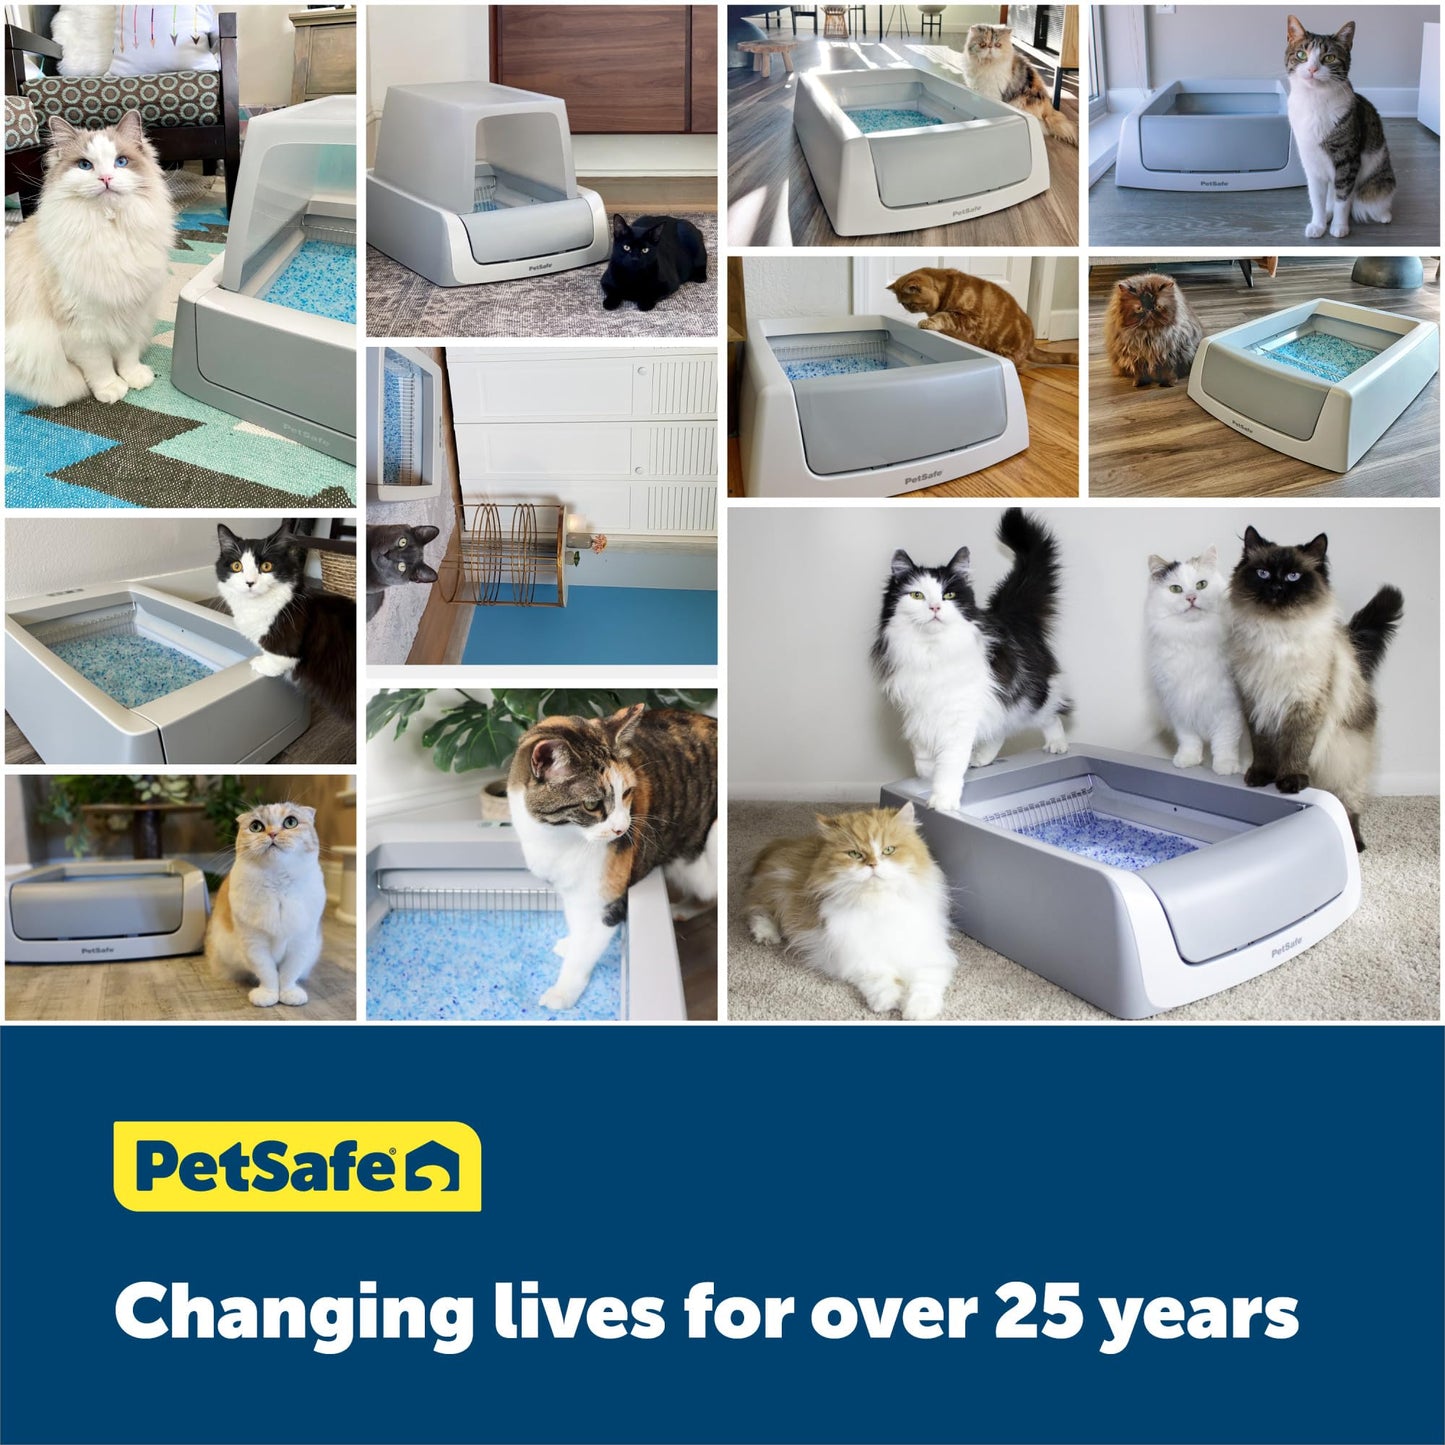 PetSafe ScoopFree Crystal Pro Self-Cleaning Cat Litterbox - Never Scoop Litter Again - Hands-Free Cleanup With Disposable Crystal Tray - Less Tracking, Better Odor Control - Includes Disposable Tray